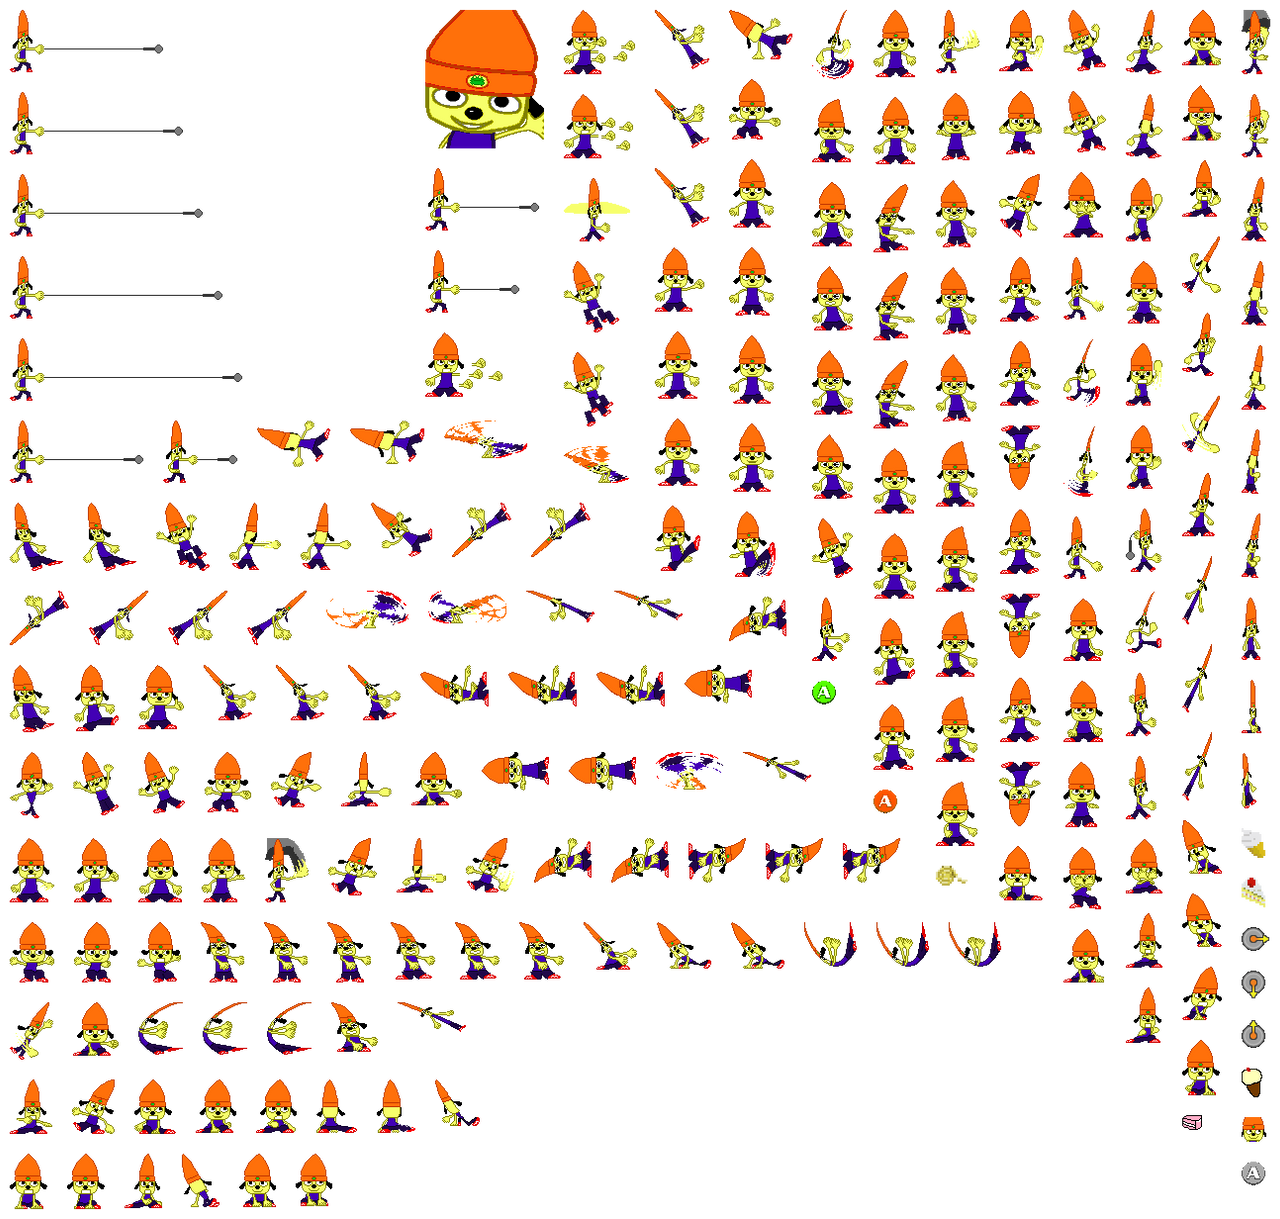 SPRITE SHEETS part 2 by Papyron95 on DeviantArt